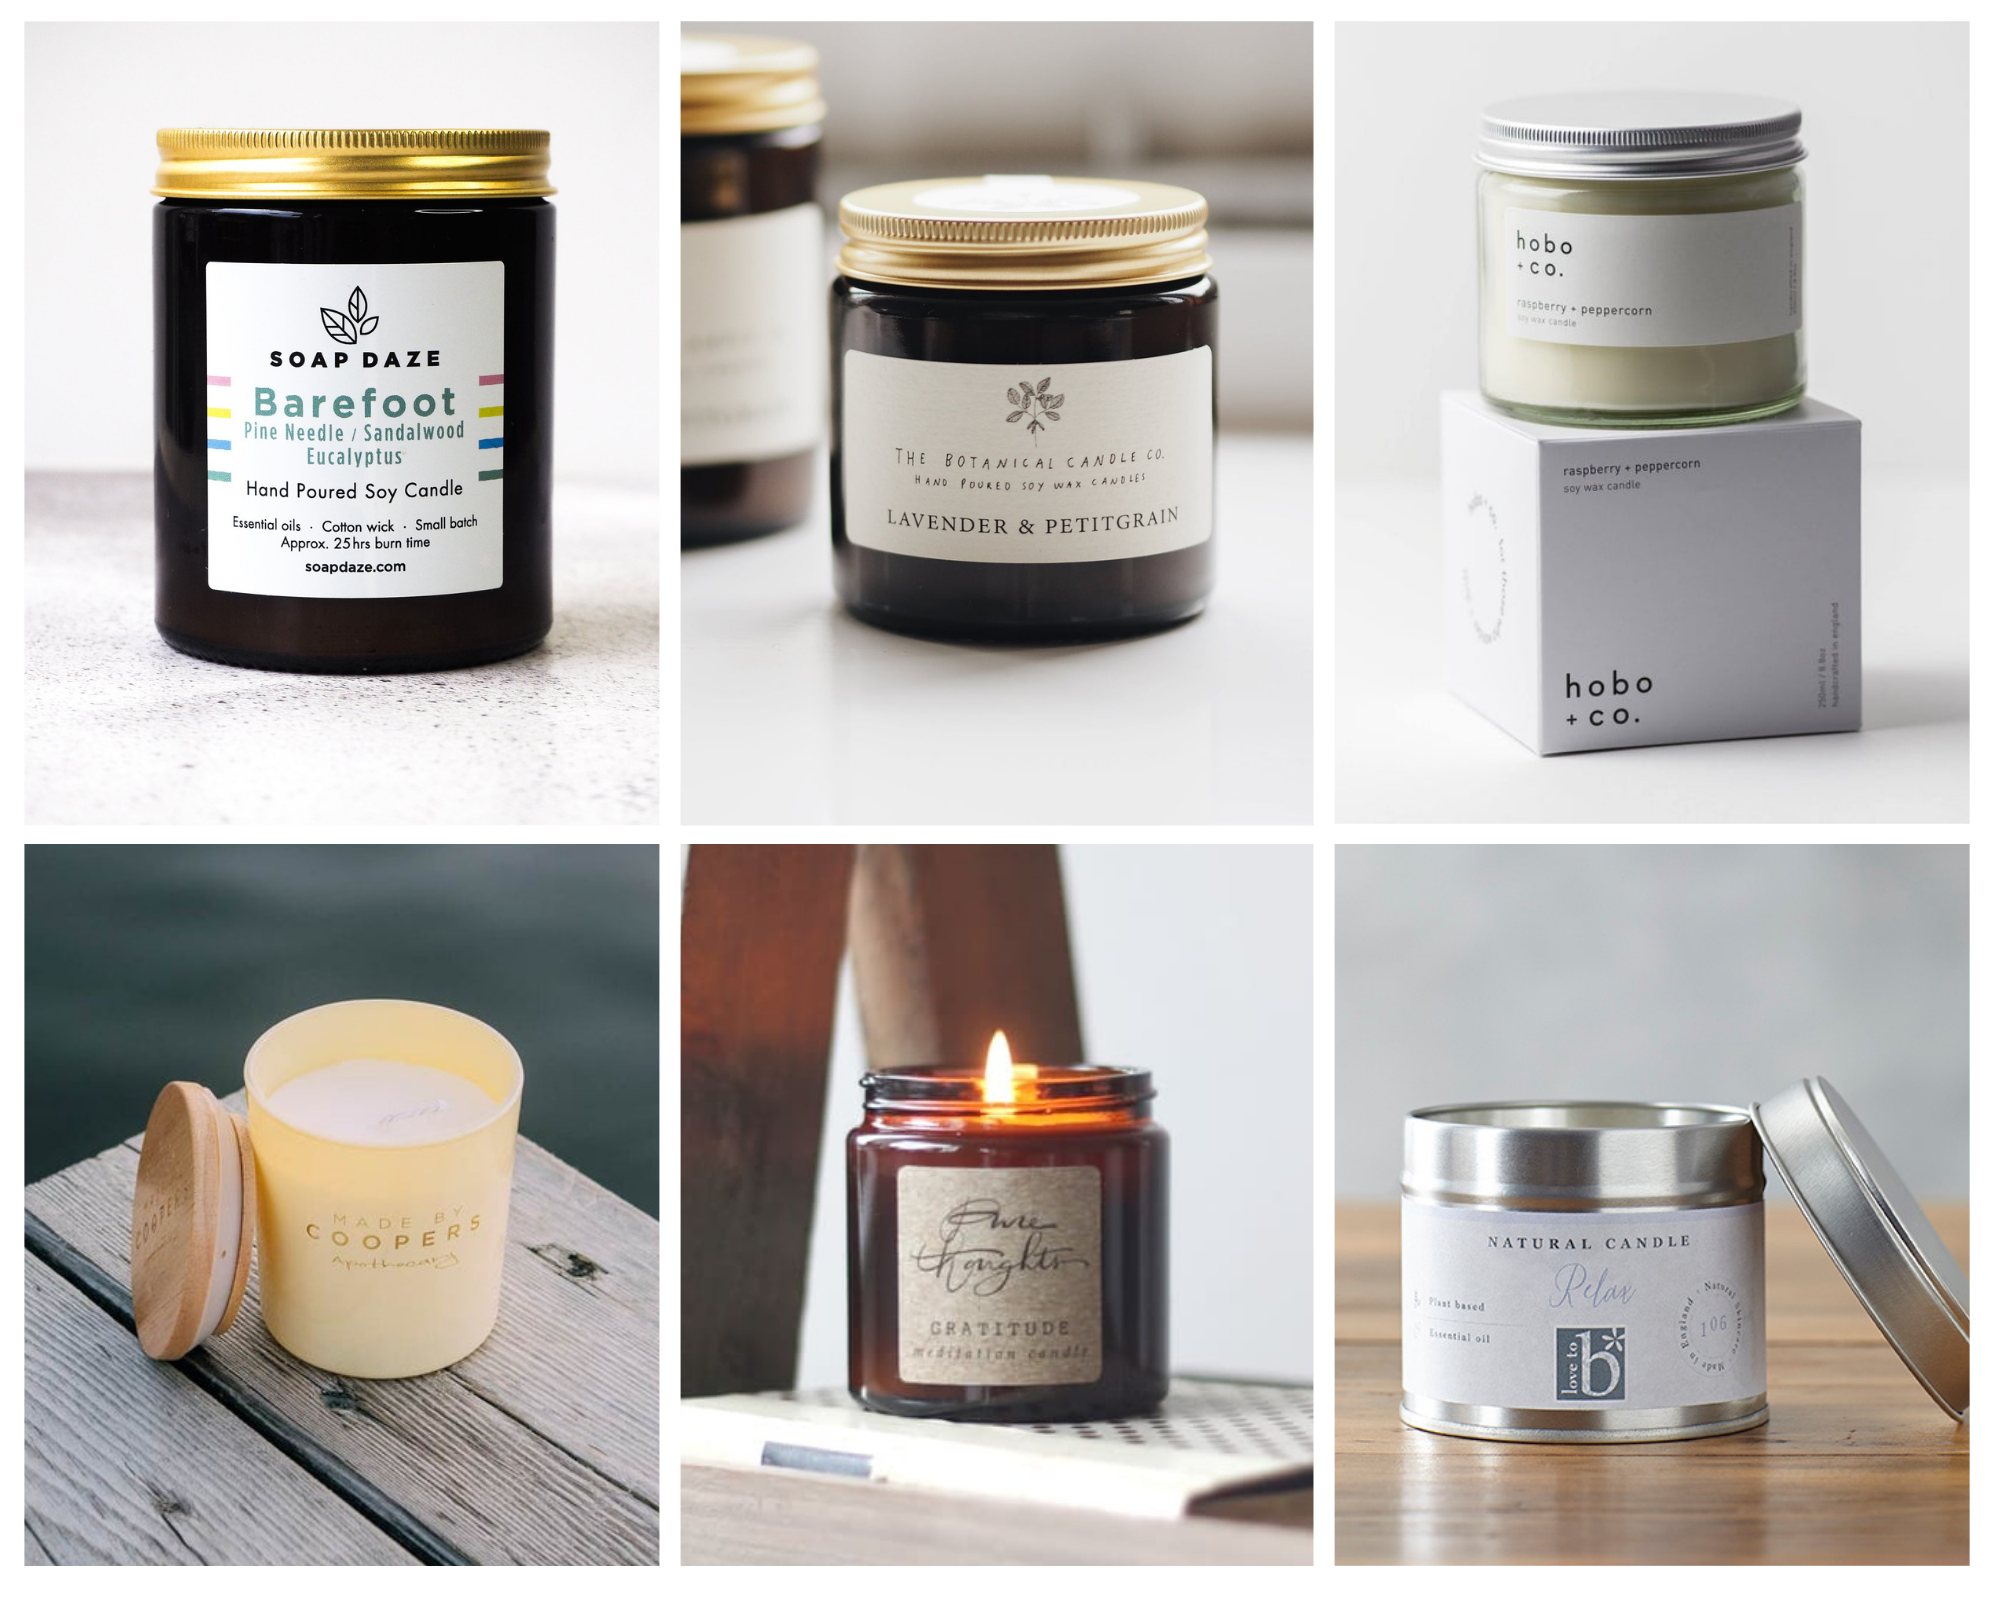 Home Fragrance with Natural Soy Wax Candles